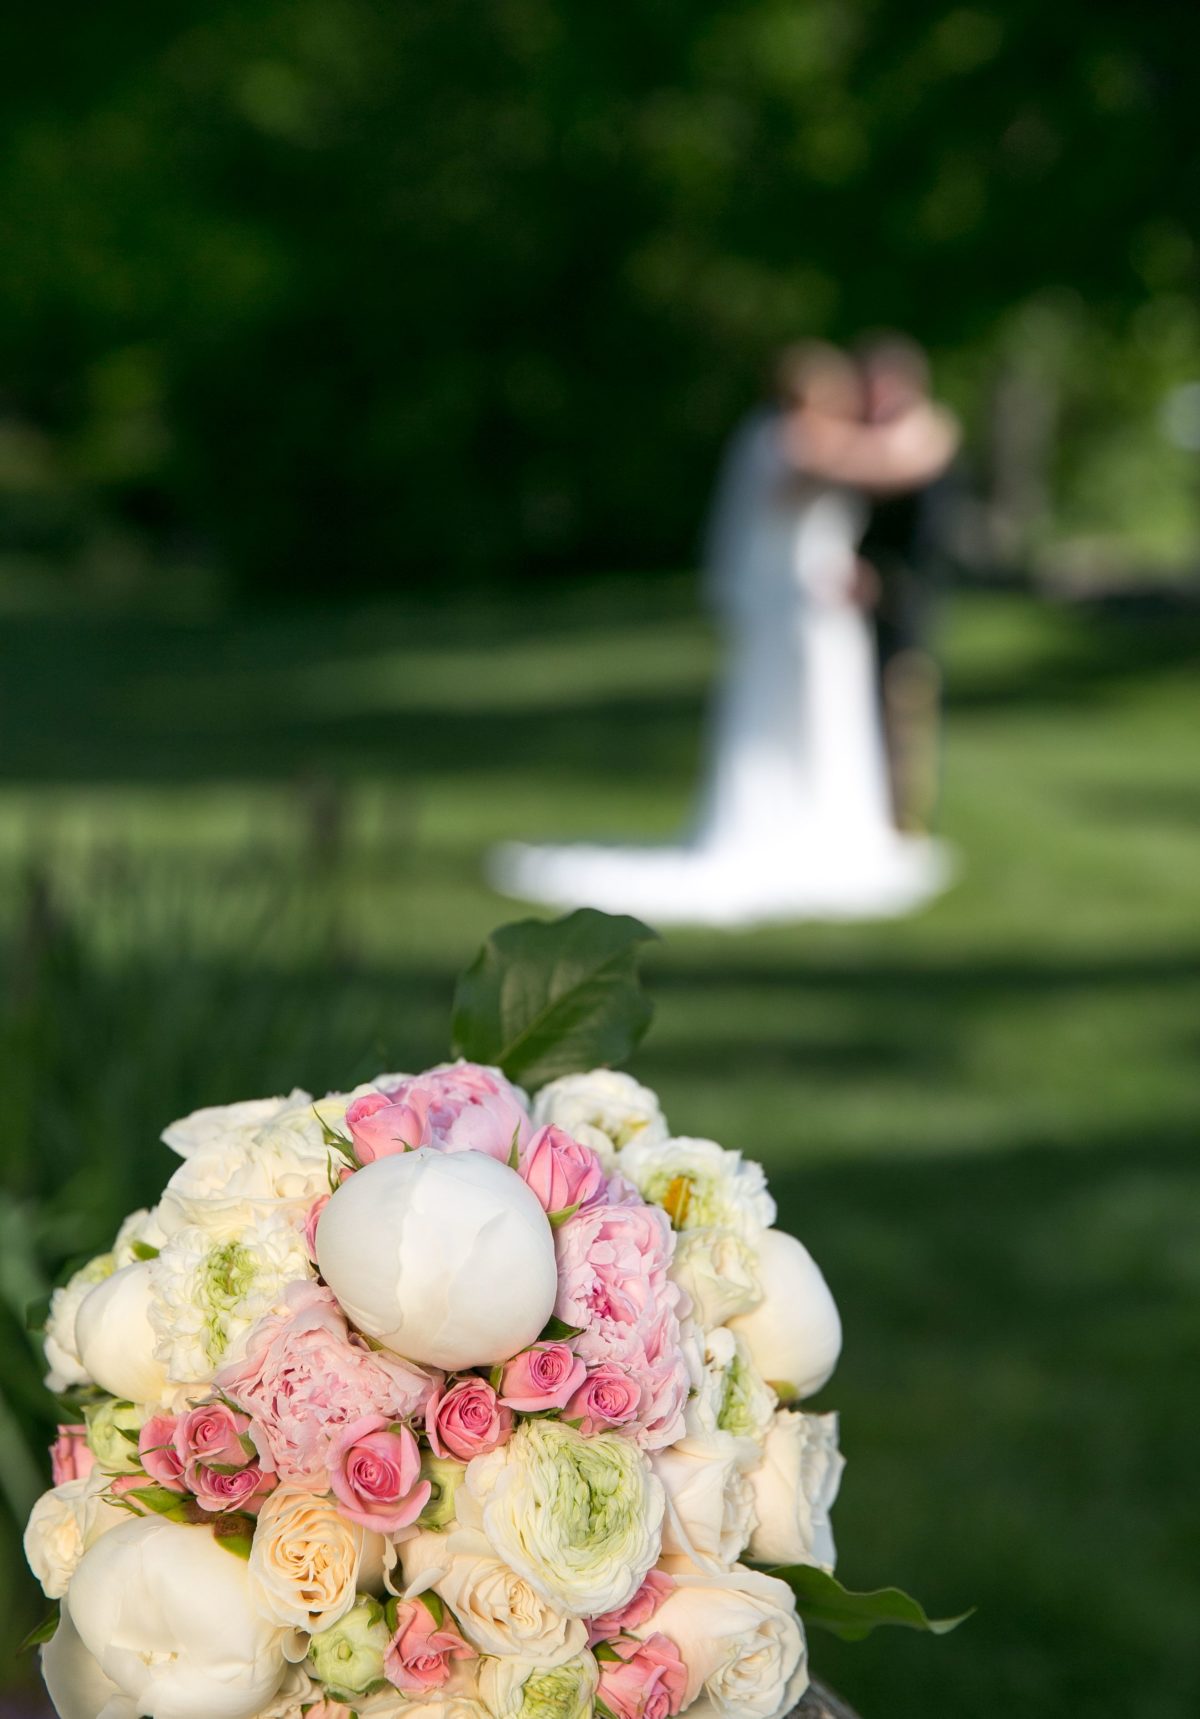 weddings-bouquets-pink-dunstable-ma